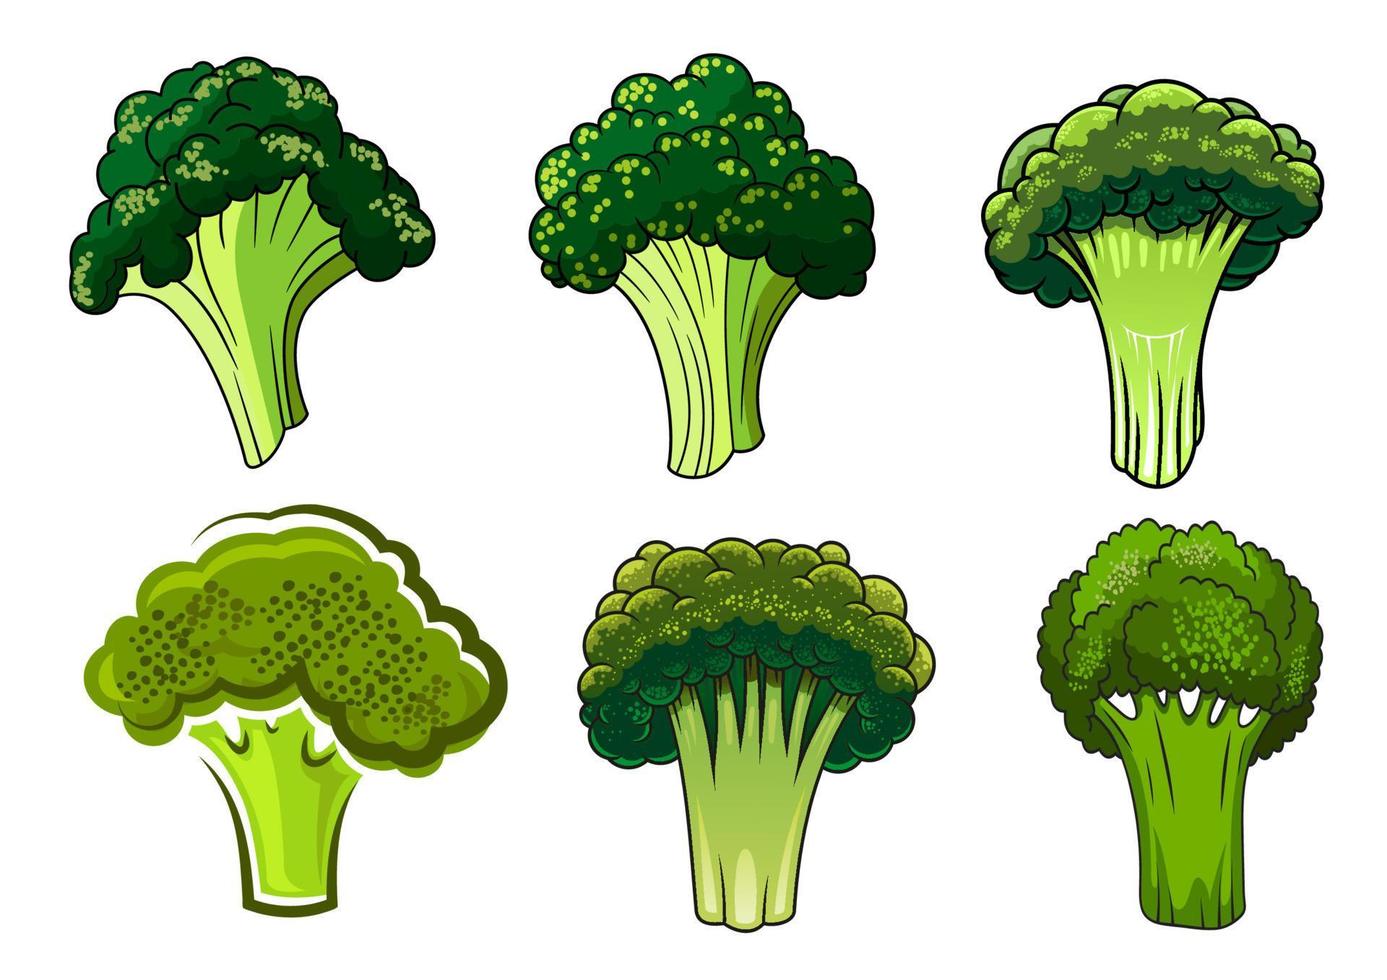 Isolated green ripe broccoli vegetables vector